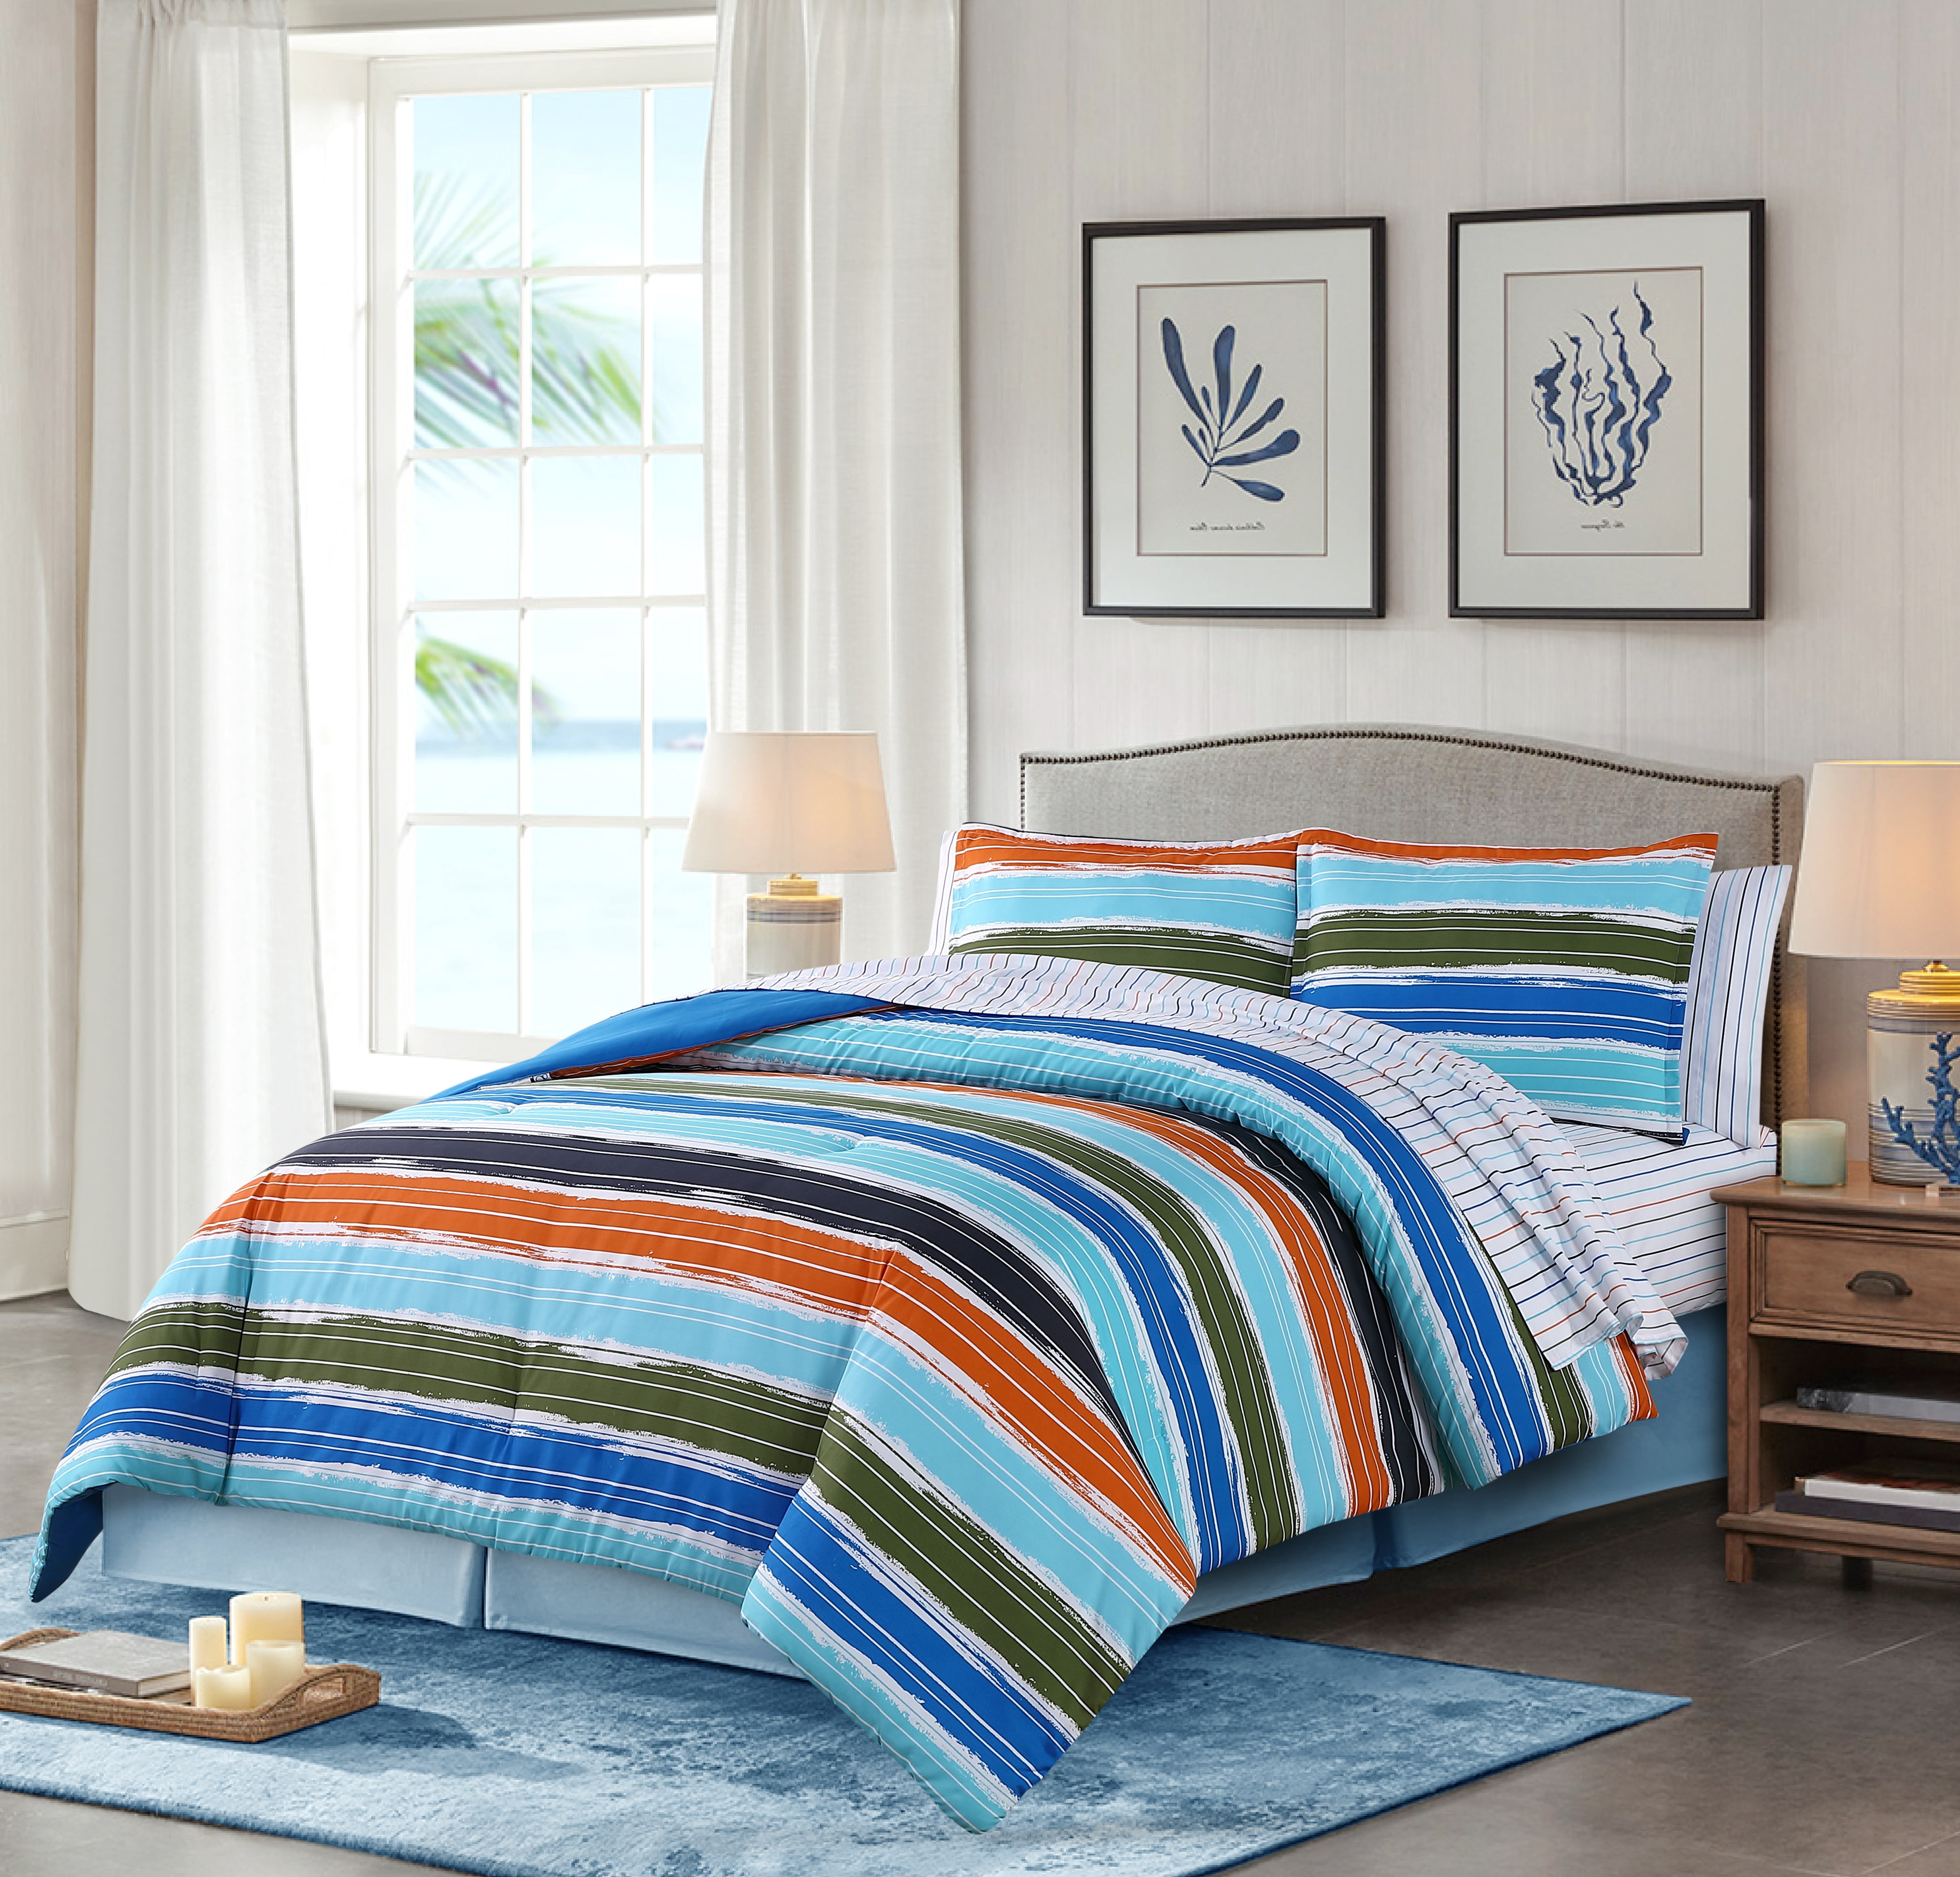 Details about   BrylaneHome Patchwork Brie Bedspread Bedding Collection 